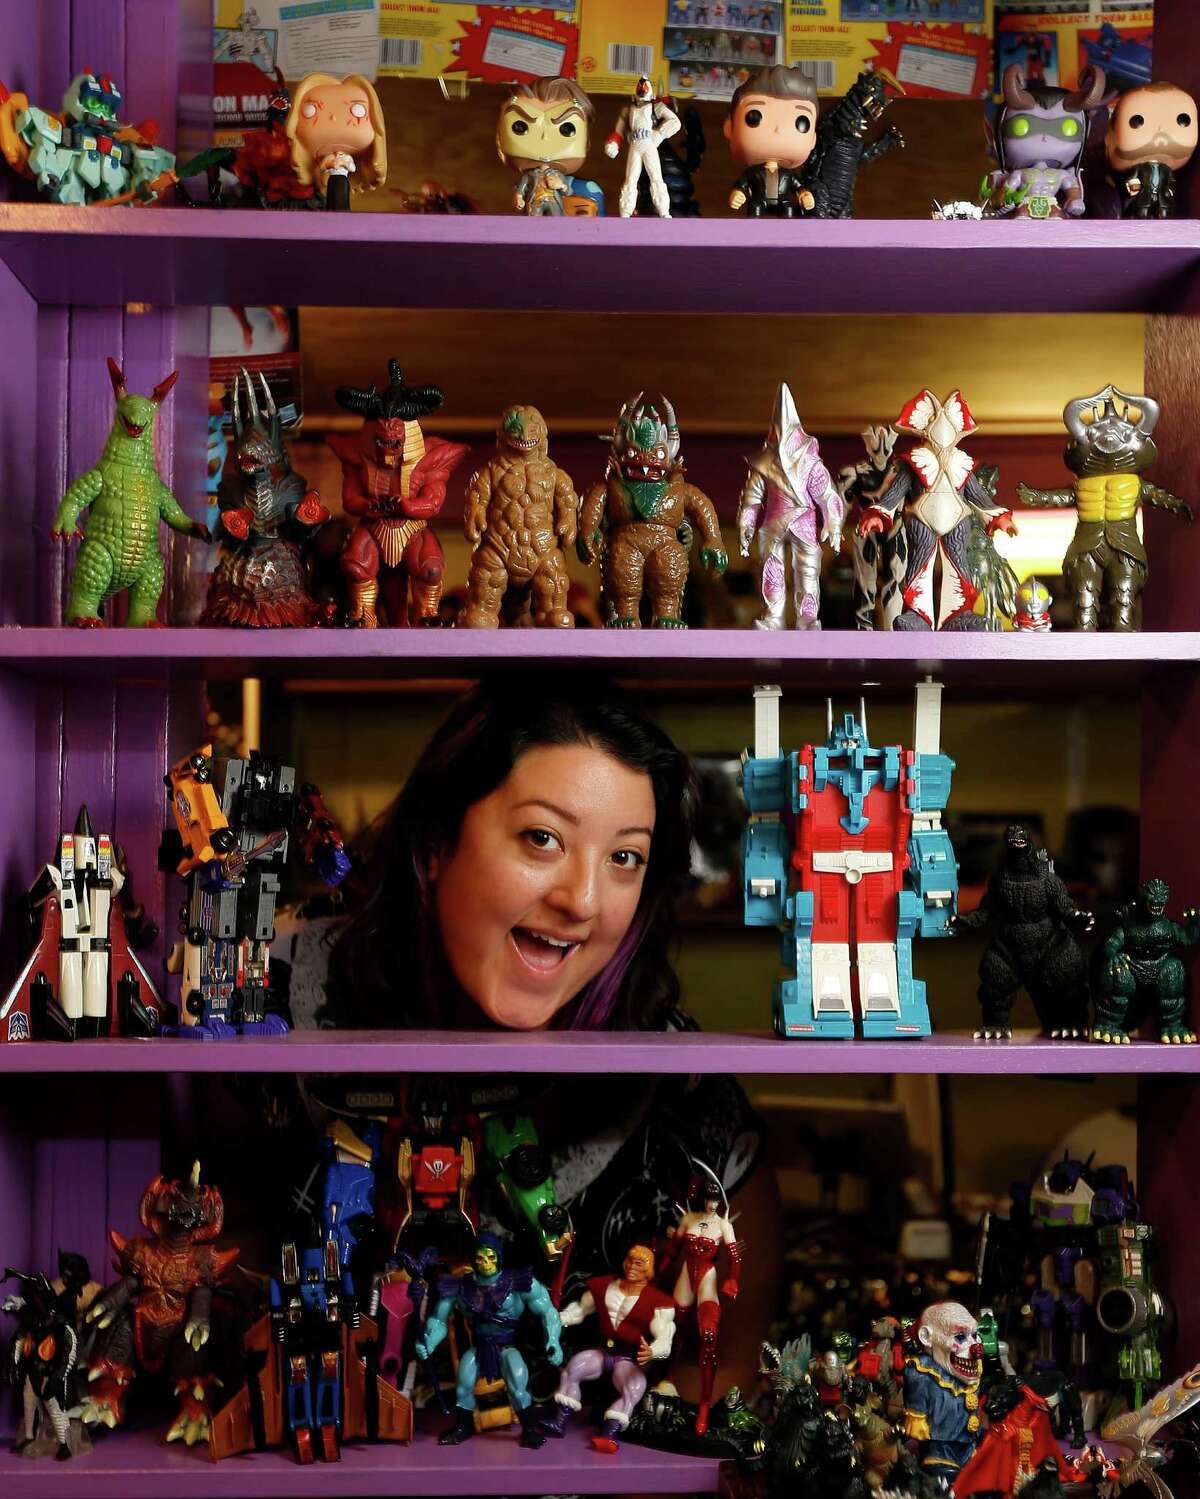 Paulina Gamino, co-owner of Misfit Toys, hopes to attract women, minorities and novice collectors to her business in the Heights. Below: Novelty items, like handcrafted horror figurines, can be found at the shop.﻿